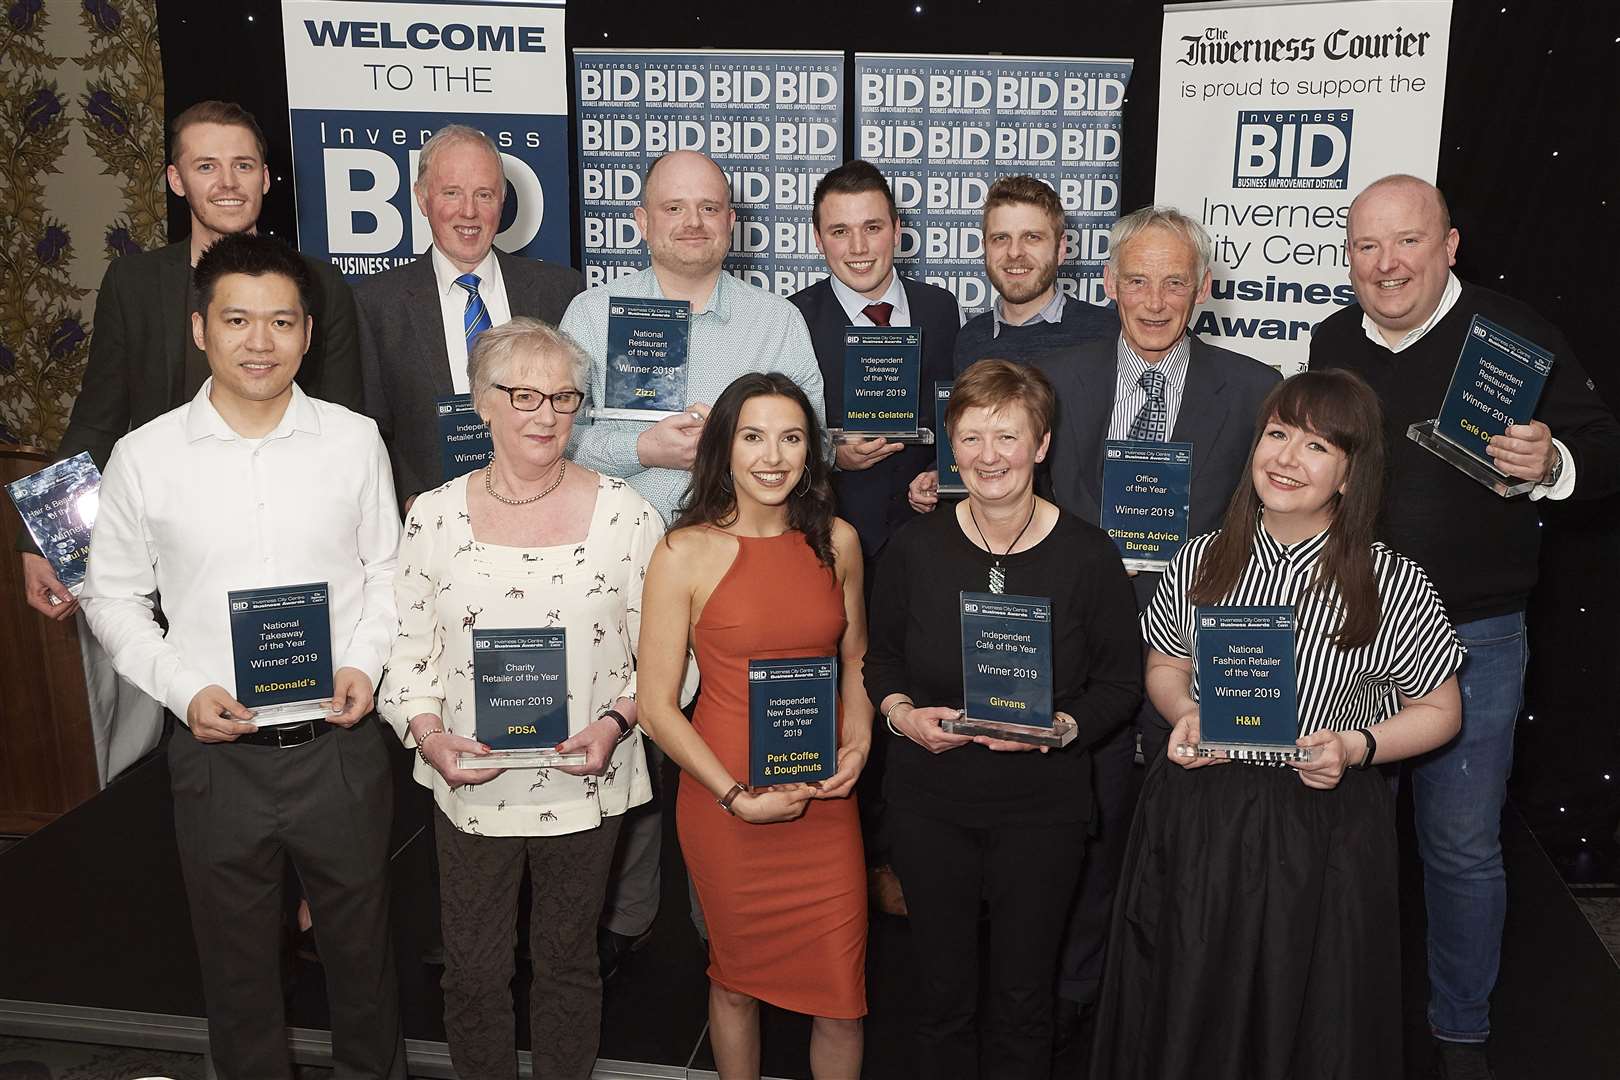 The 2019 Inverness Business Improvement District City Centre Awards category winners.